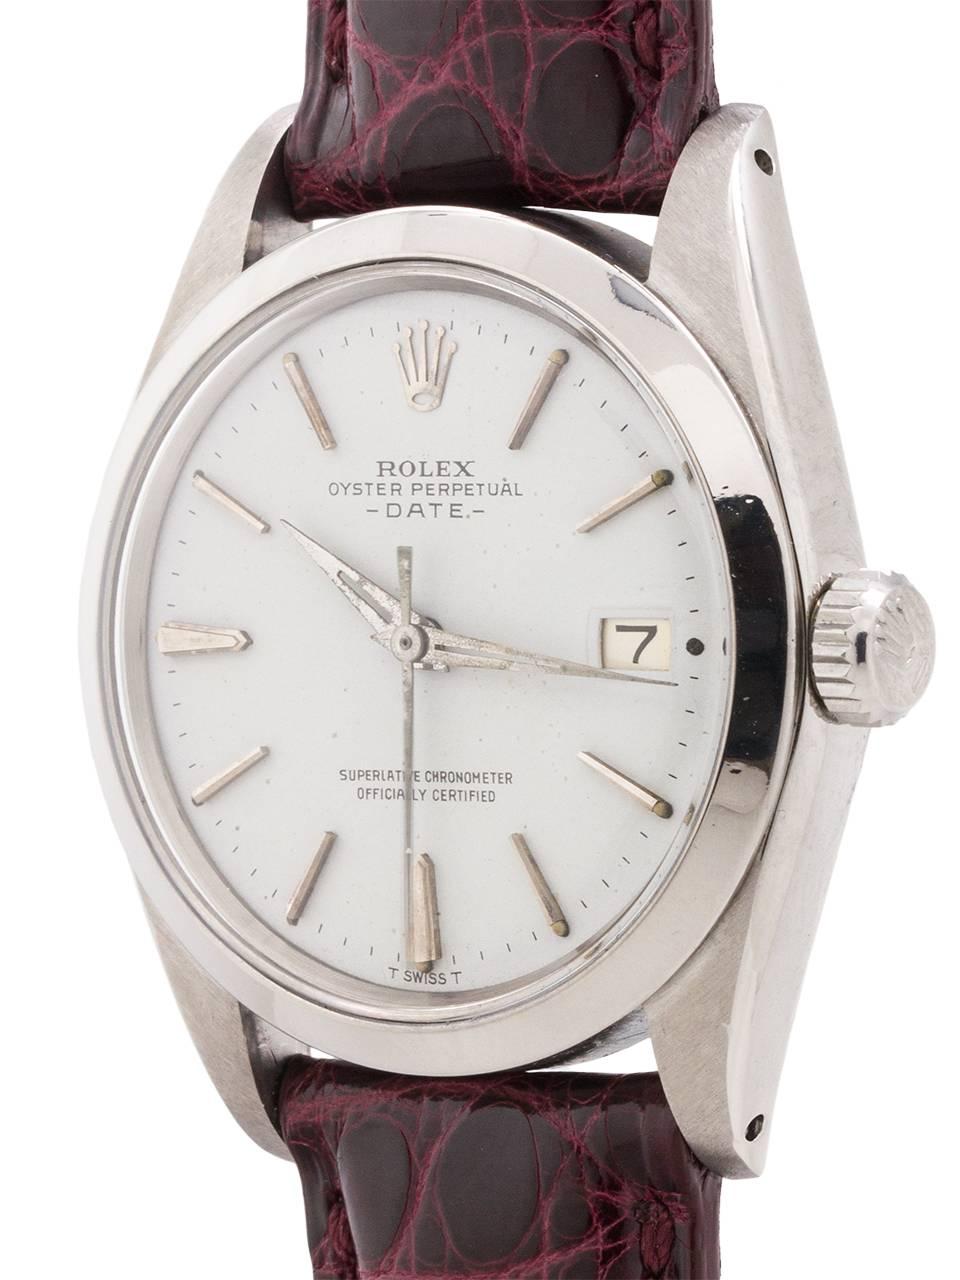 
Rolex Oyster Perpetual Date ref 1500 serial# 1.4 million circa 1966. Featuring a 34mm diameter case with smooth bezel and acrylic crystal and nicely refinished snow white dial with applied silver indexes and tapered silver dauphine hands. Powered